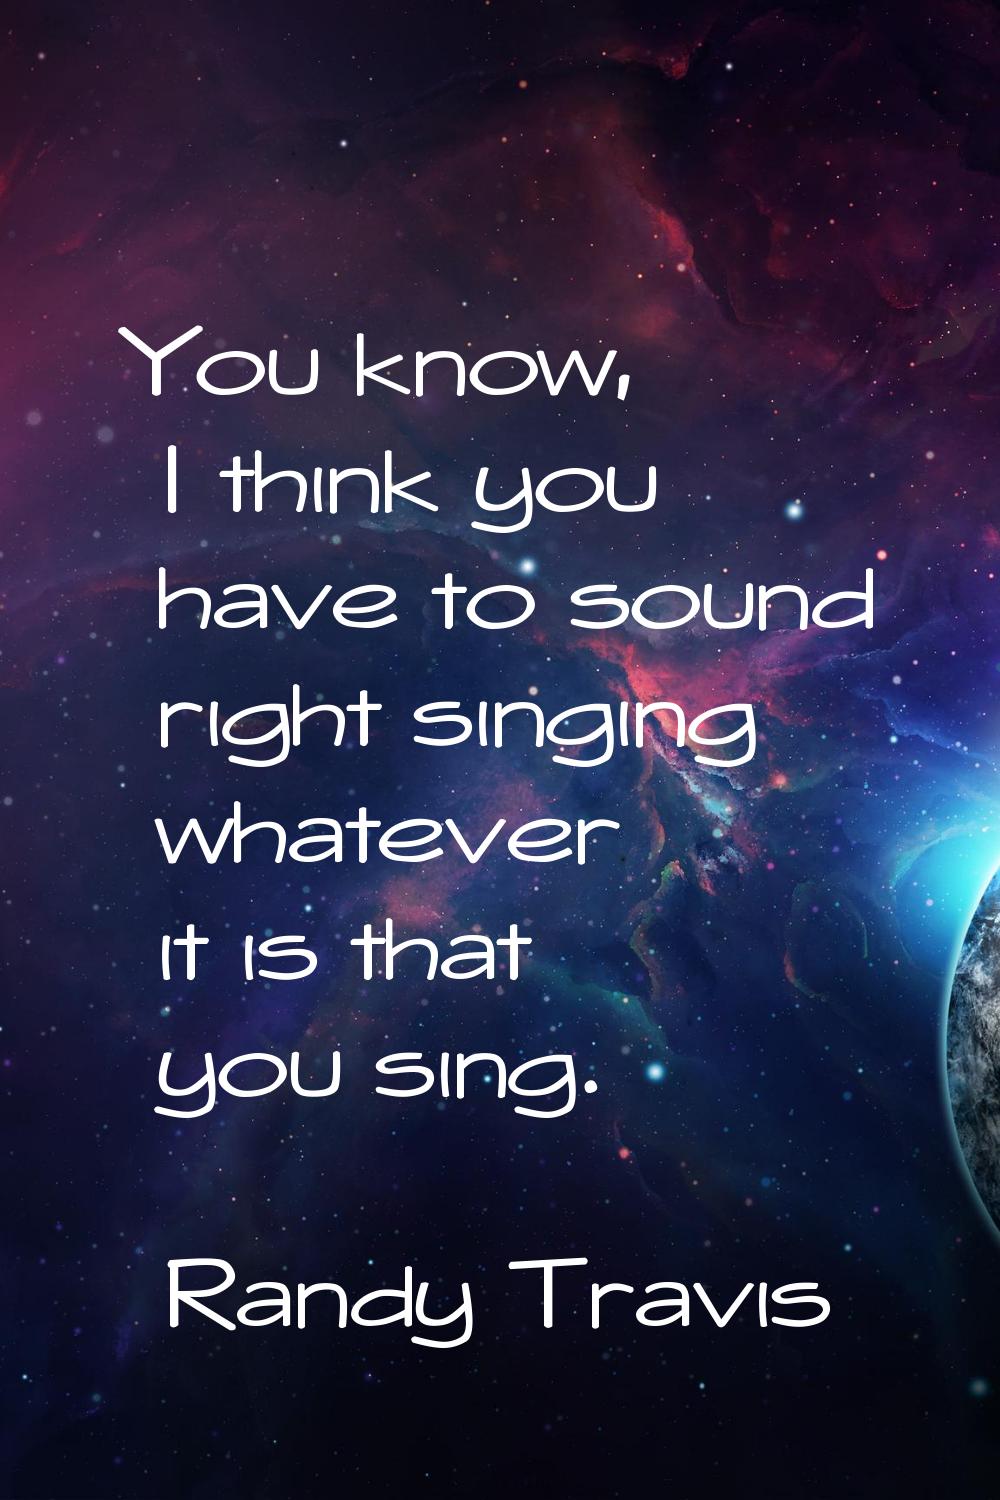 You know, I think you have to sound right singing whatever it is that you sing.